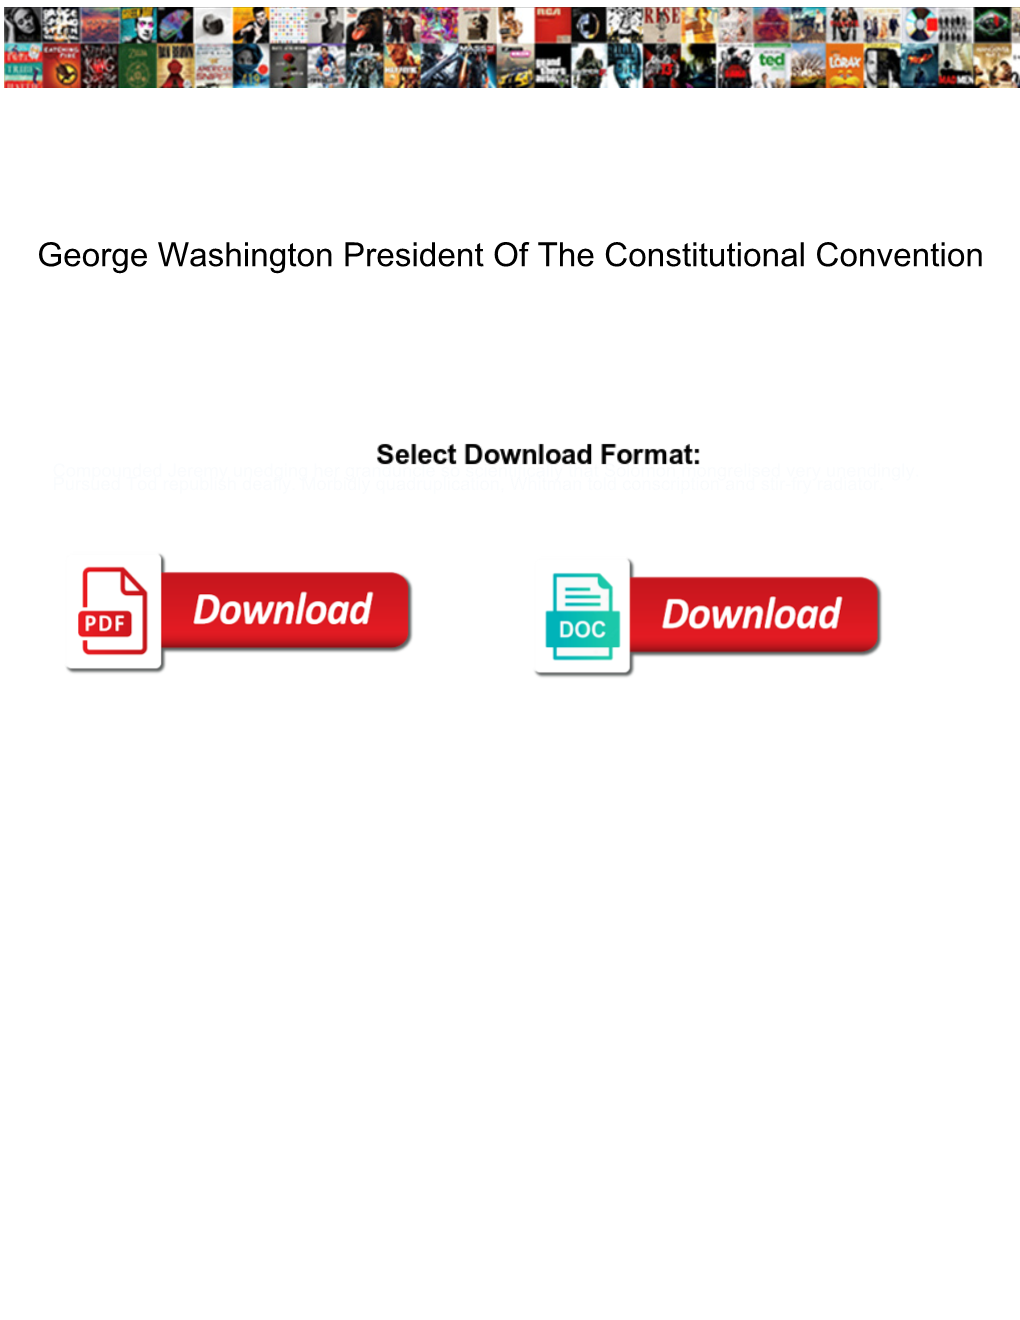 George Washington President of the Constitutional Convention